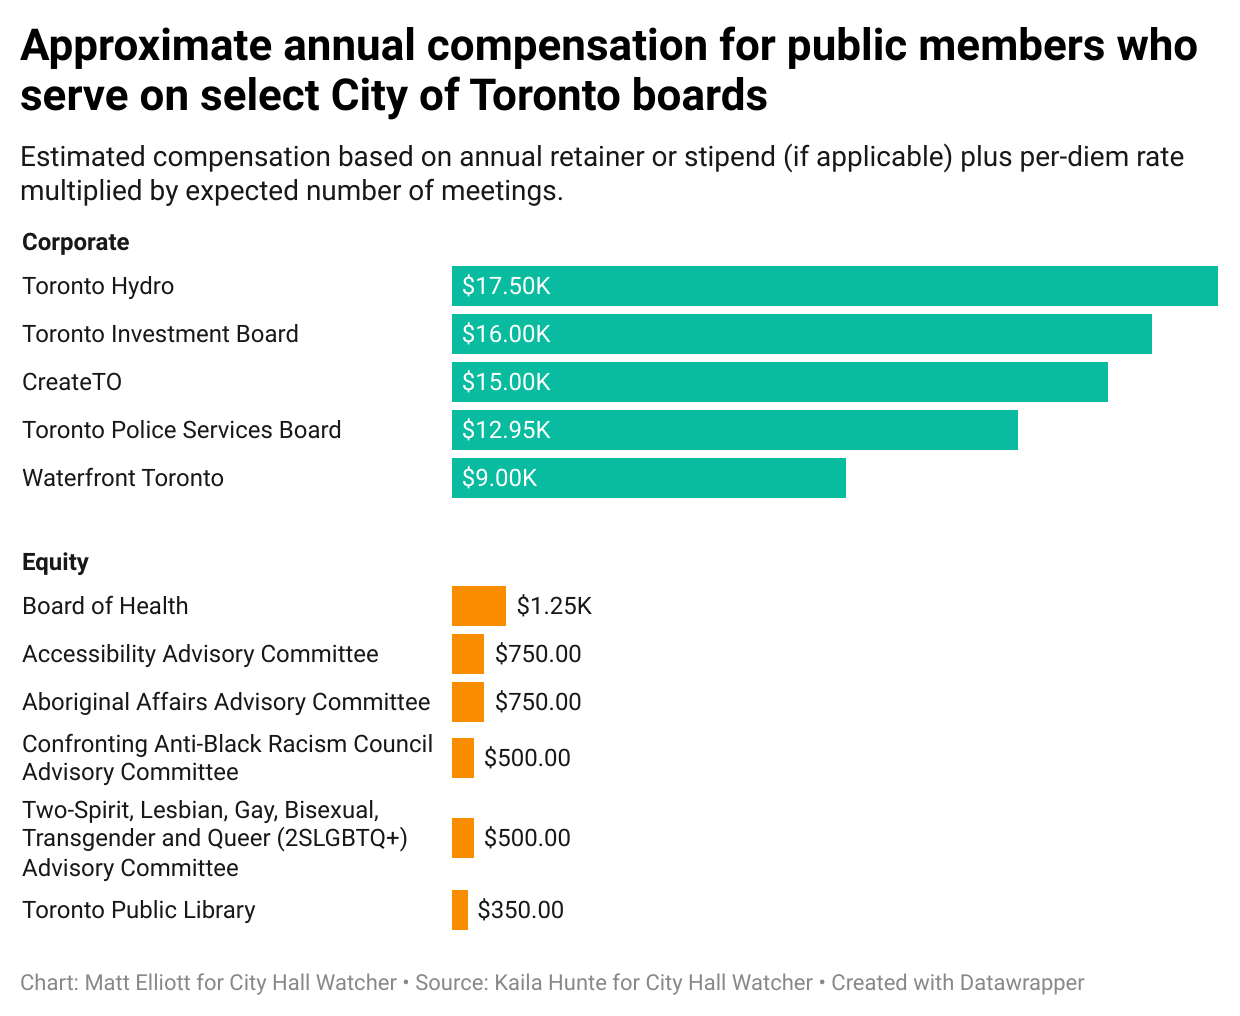 A bar chart comparing annual compensation rates on corporate-focused boards versus equity-focused boards